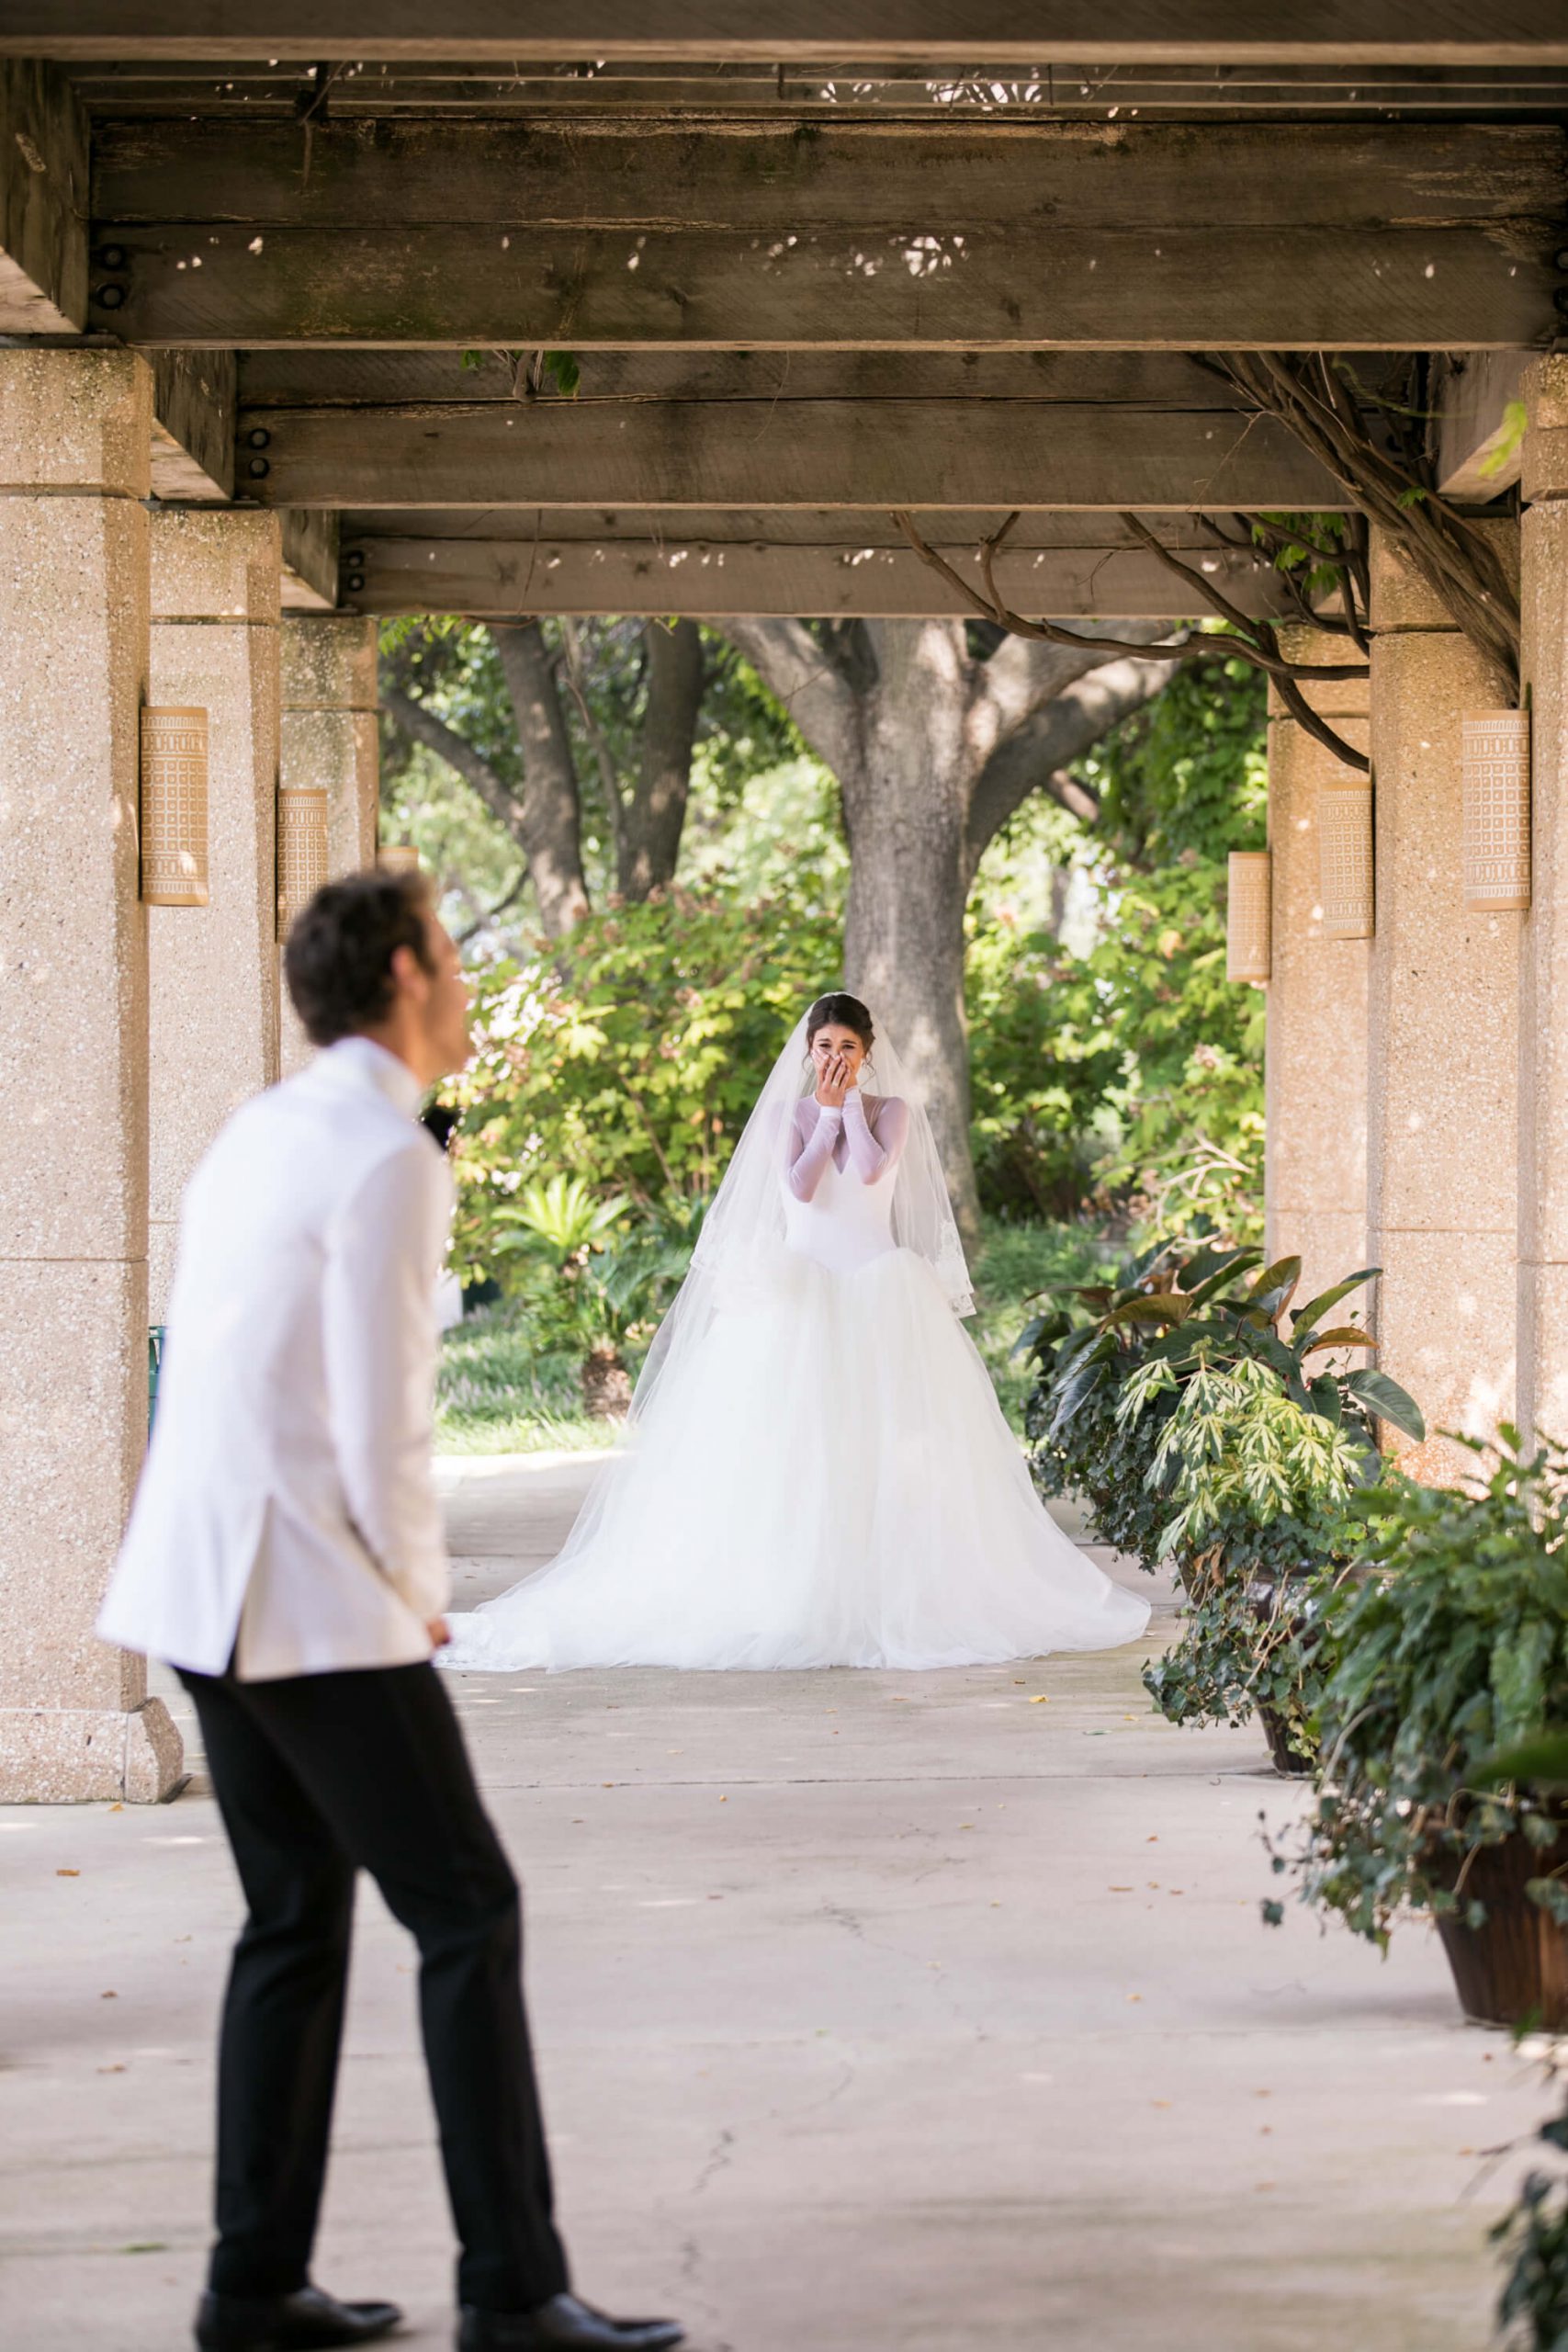 A Few Favorite First Looks - John Cain Photography